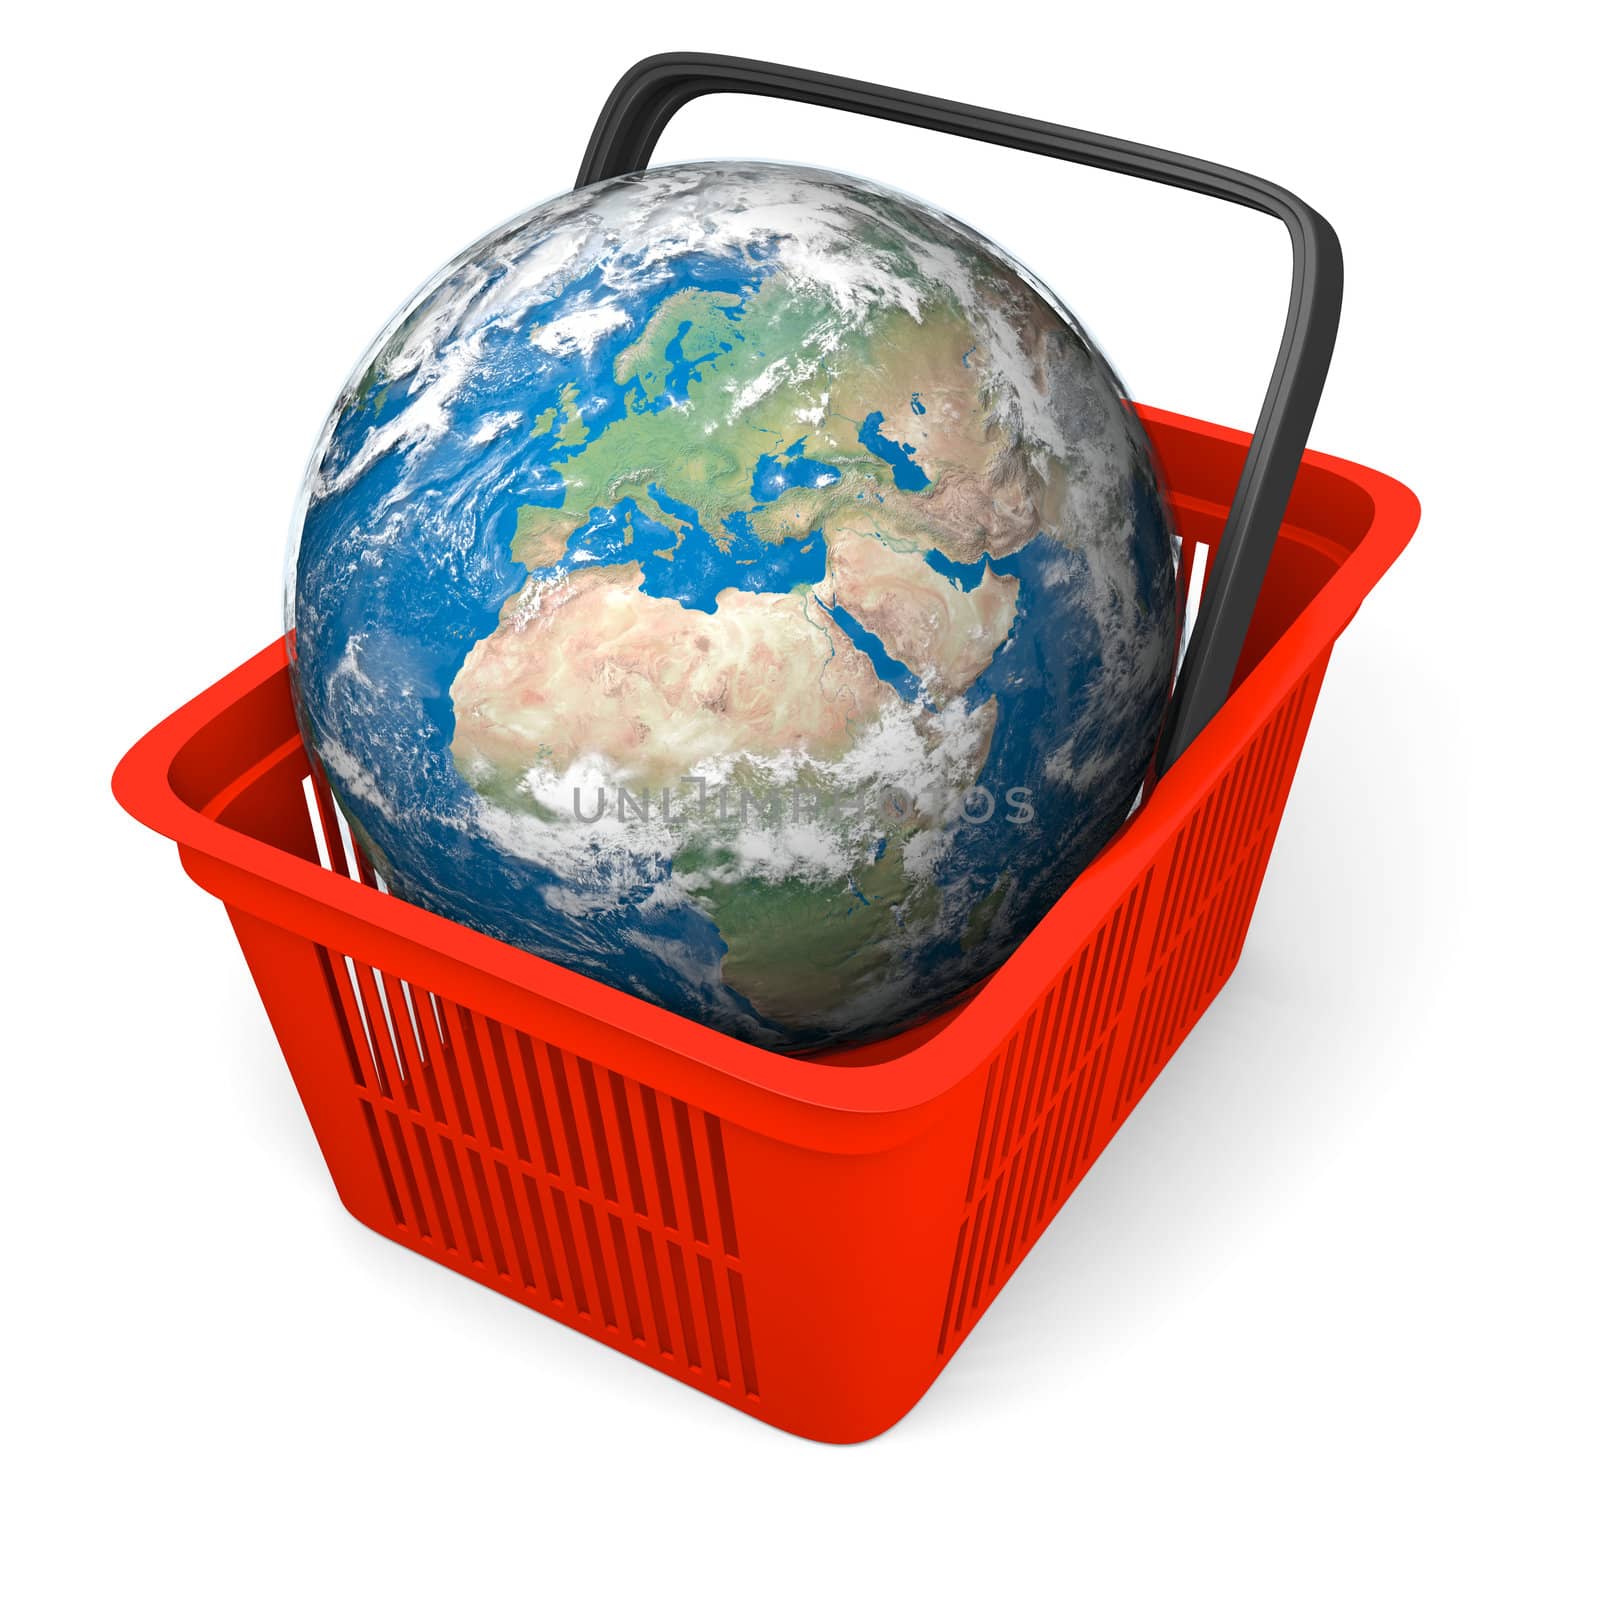 Earth in shopping basket by Harvepino